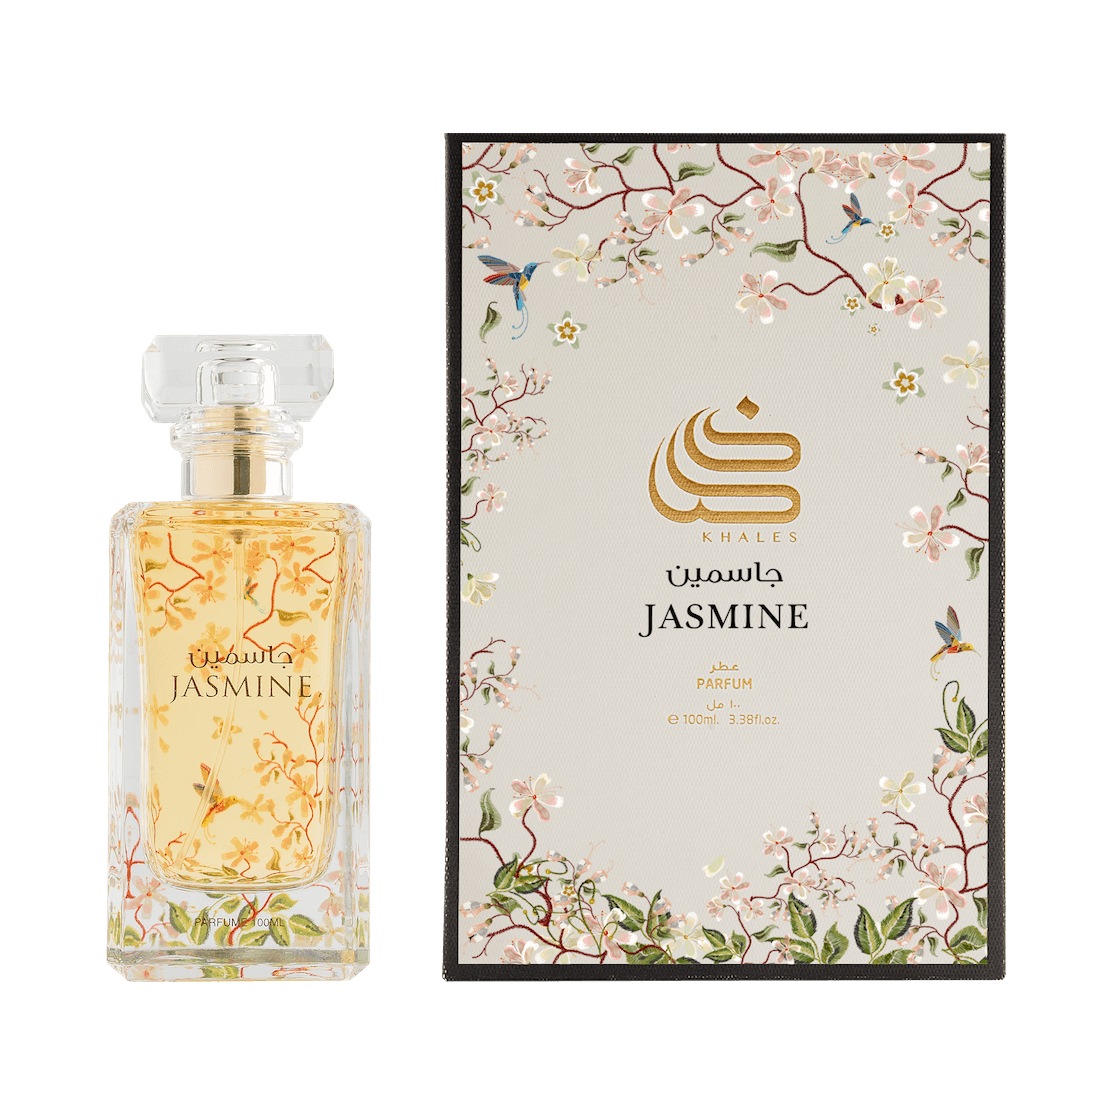 Jasmine (100ml) - Khales - MHGboutique - perfumes - fragrances - oud - online shopping - free shipping - top perfumes - best perfumes